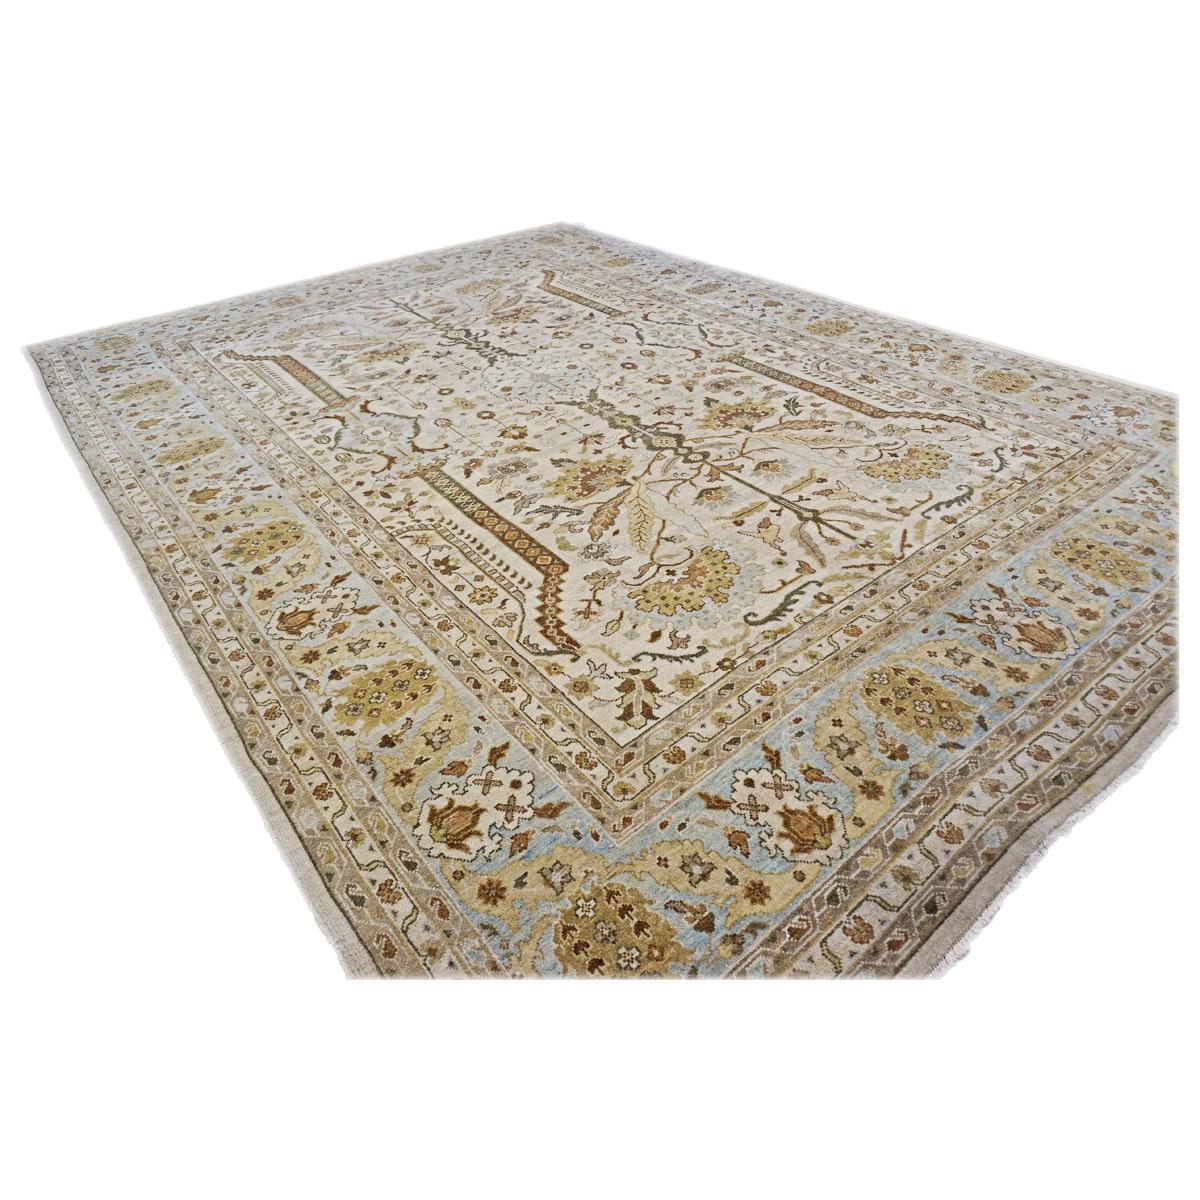 Afghan 21st Century Sultanabad Master 10x14 Ivory, Tan, & Blue Handmade Area Rug For Sale